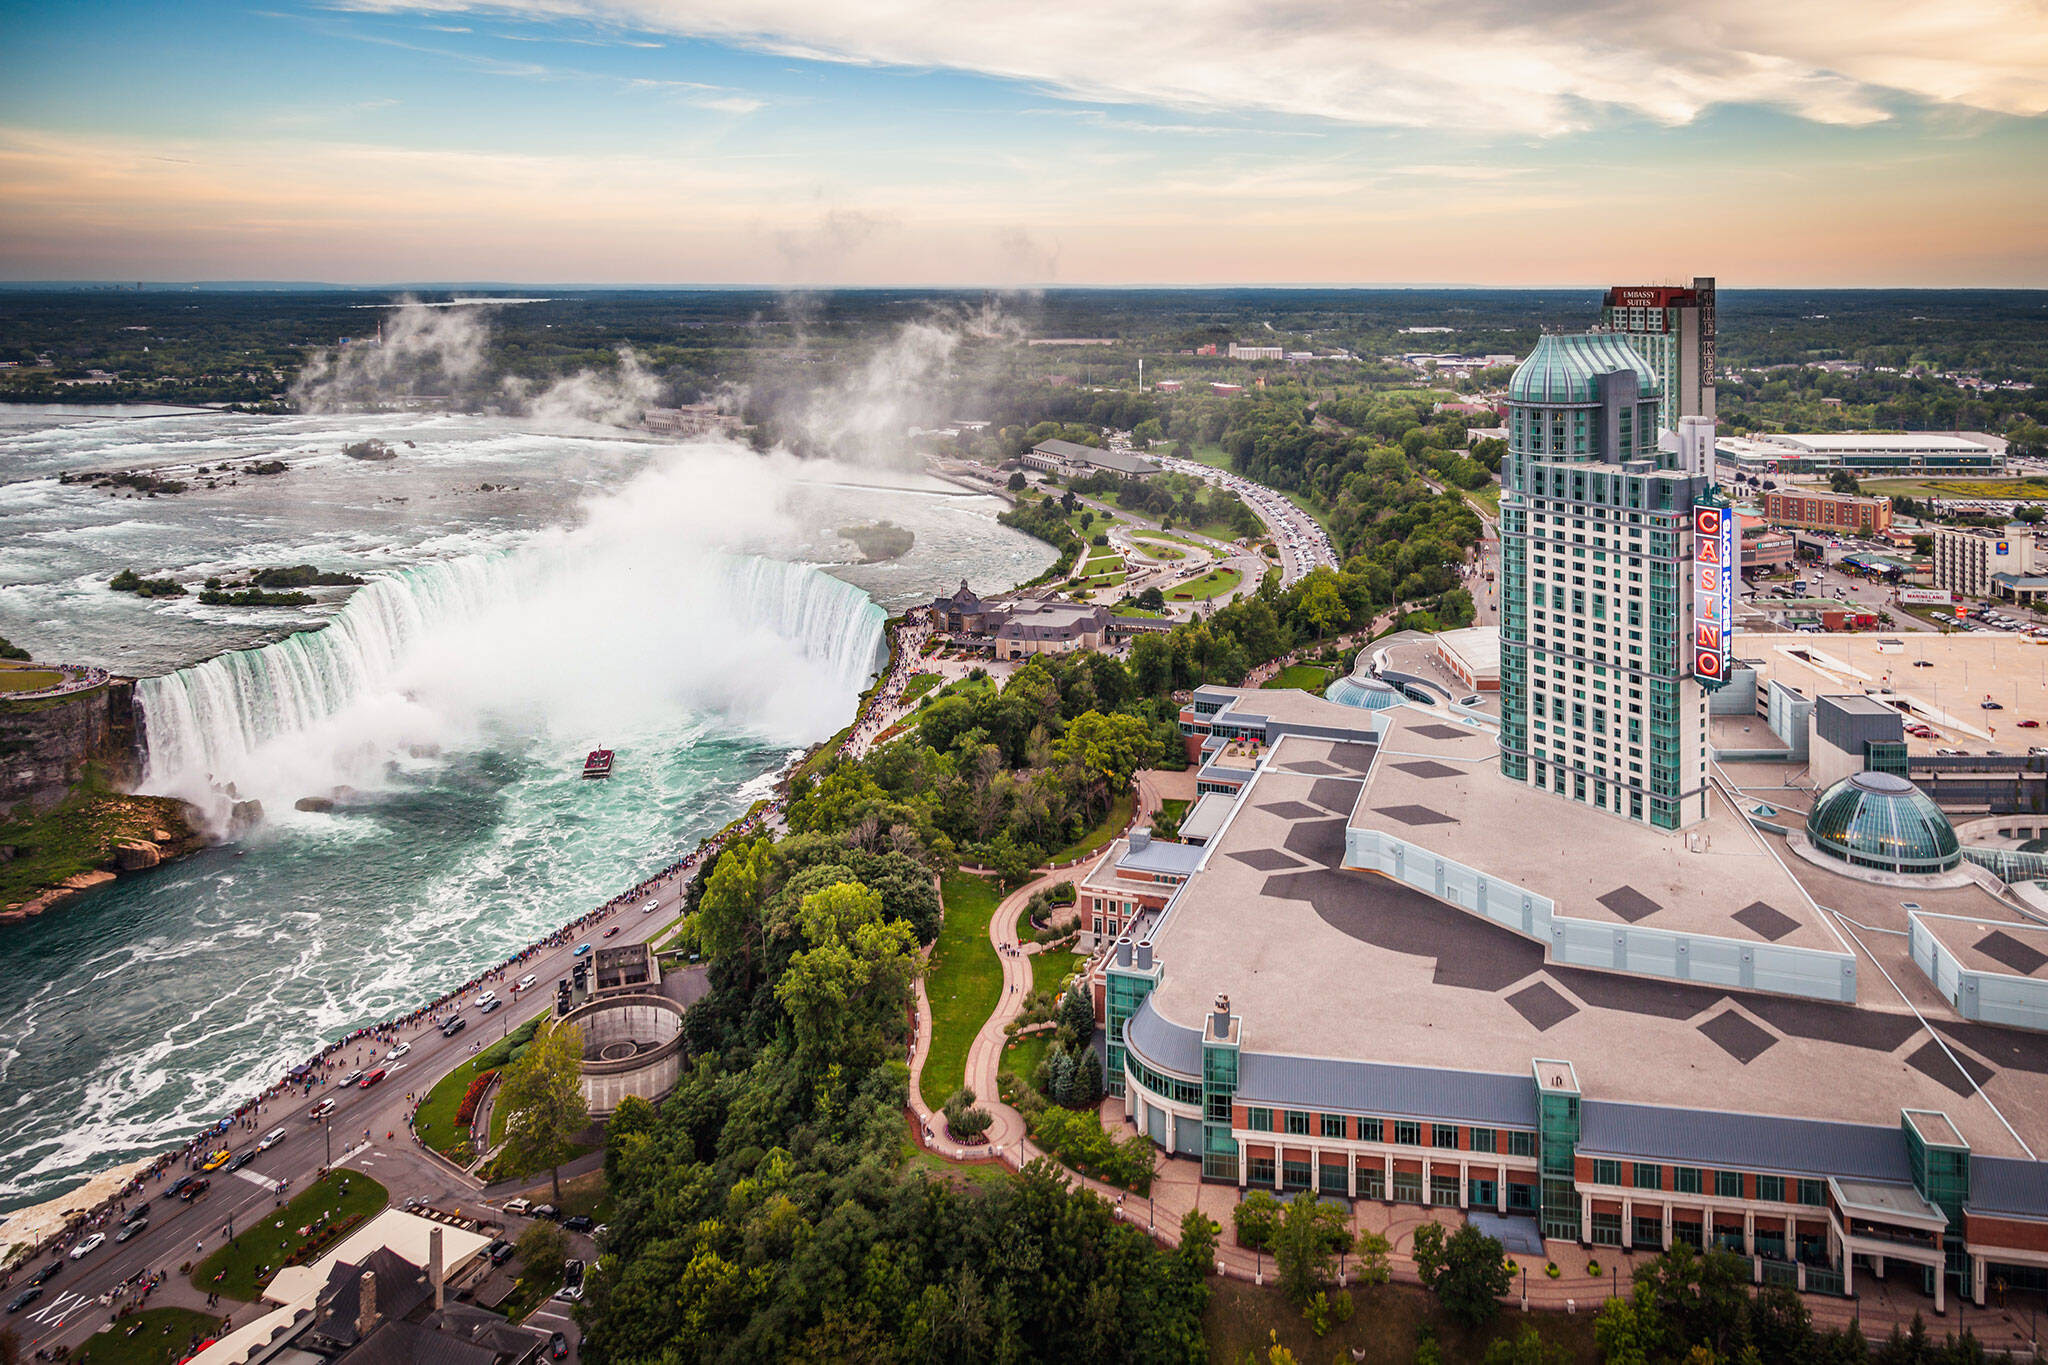 Toronto could soon be getting a high-speed ferry service to Niagara Falls